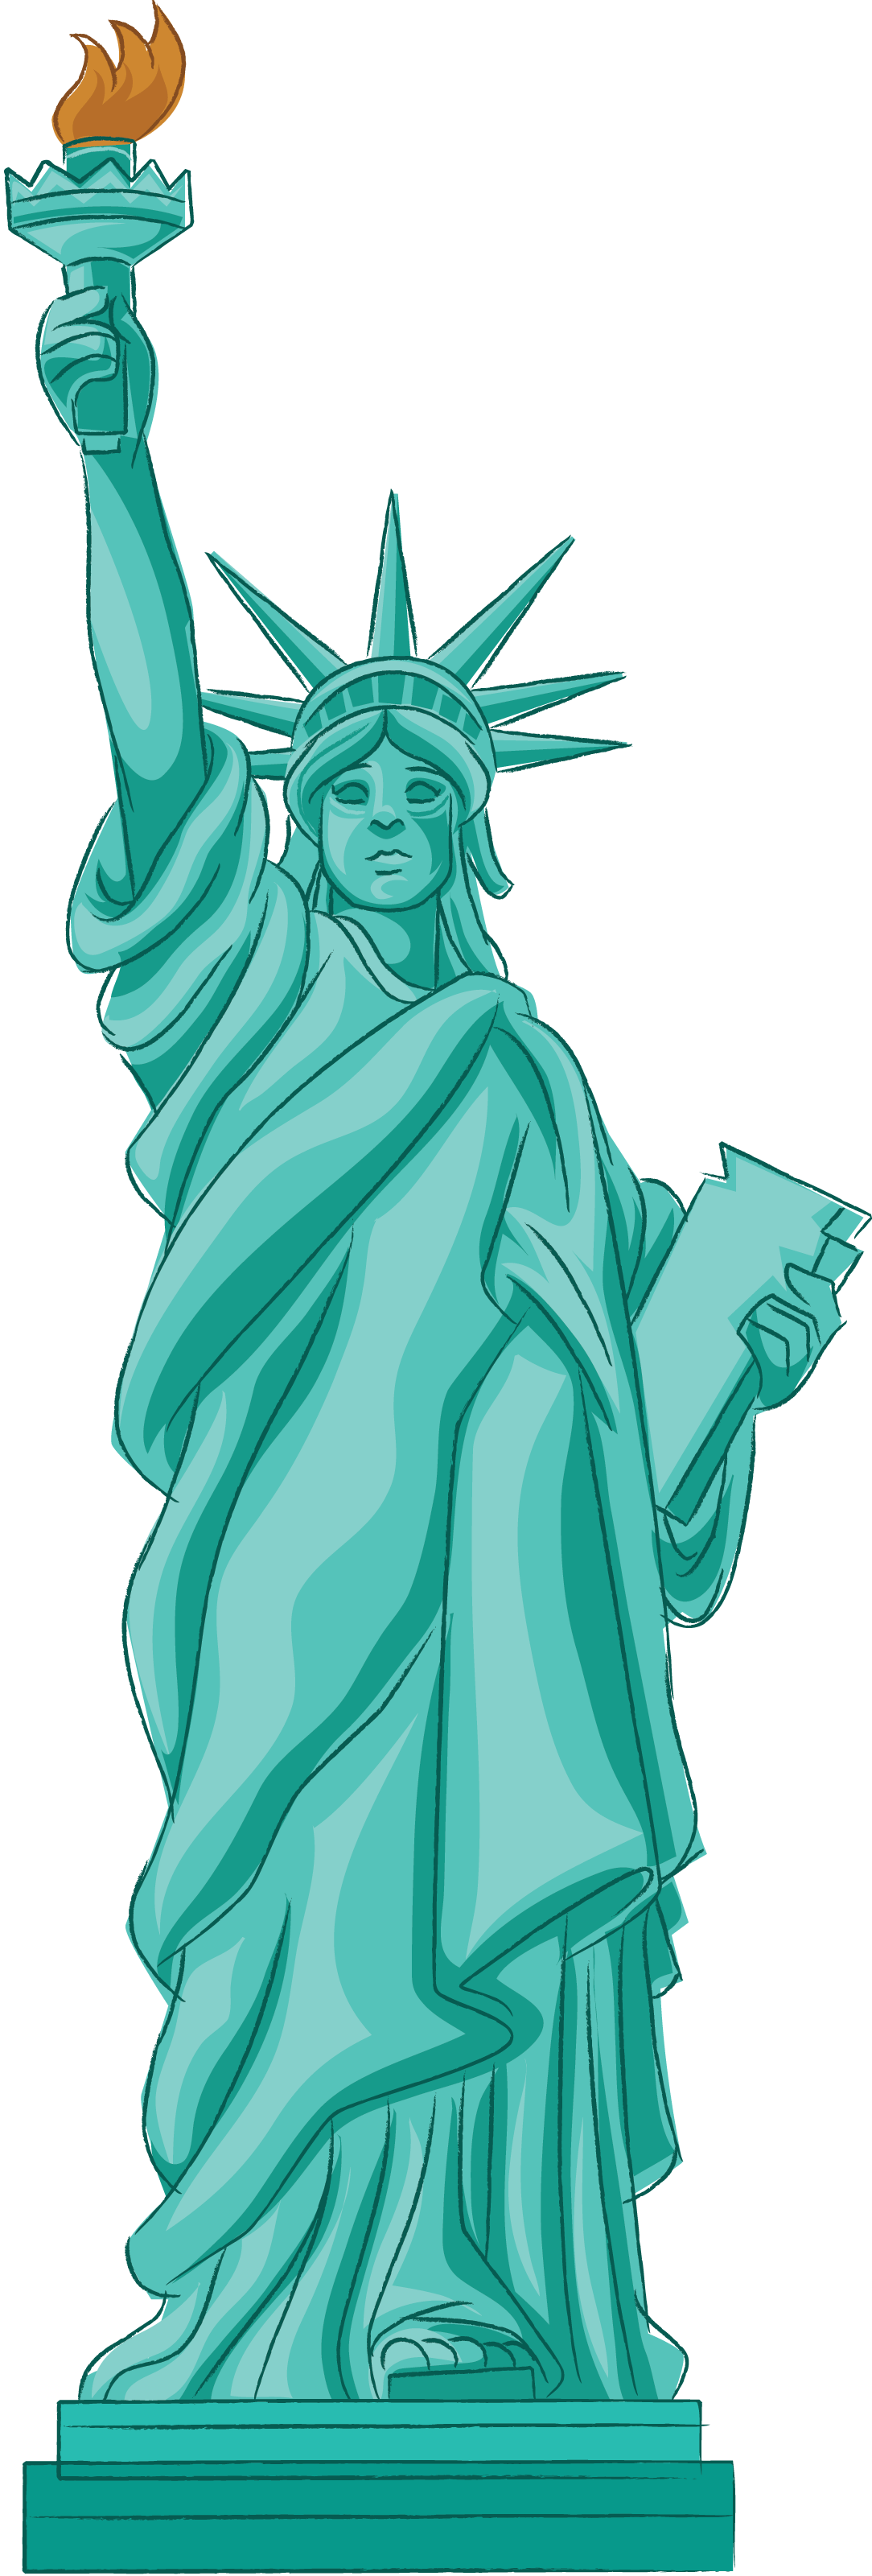 Statue clipart #11, Download drawings